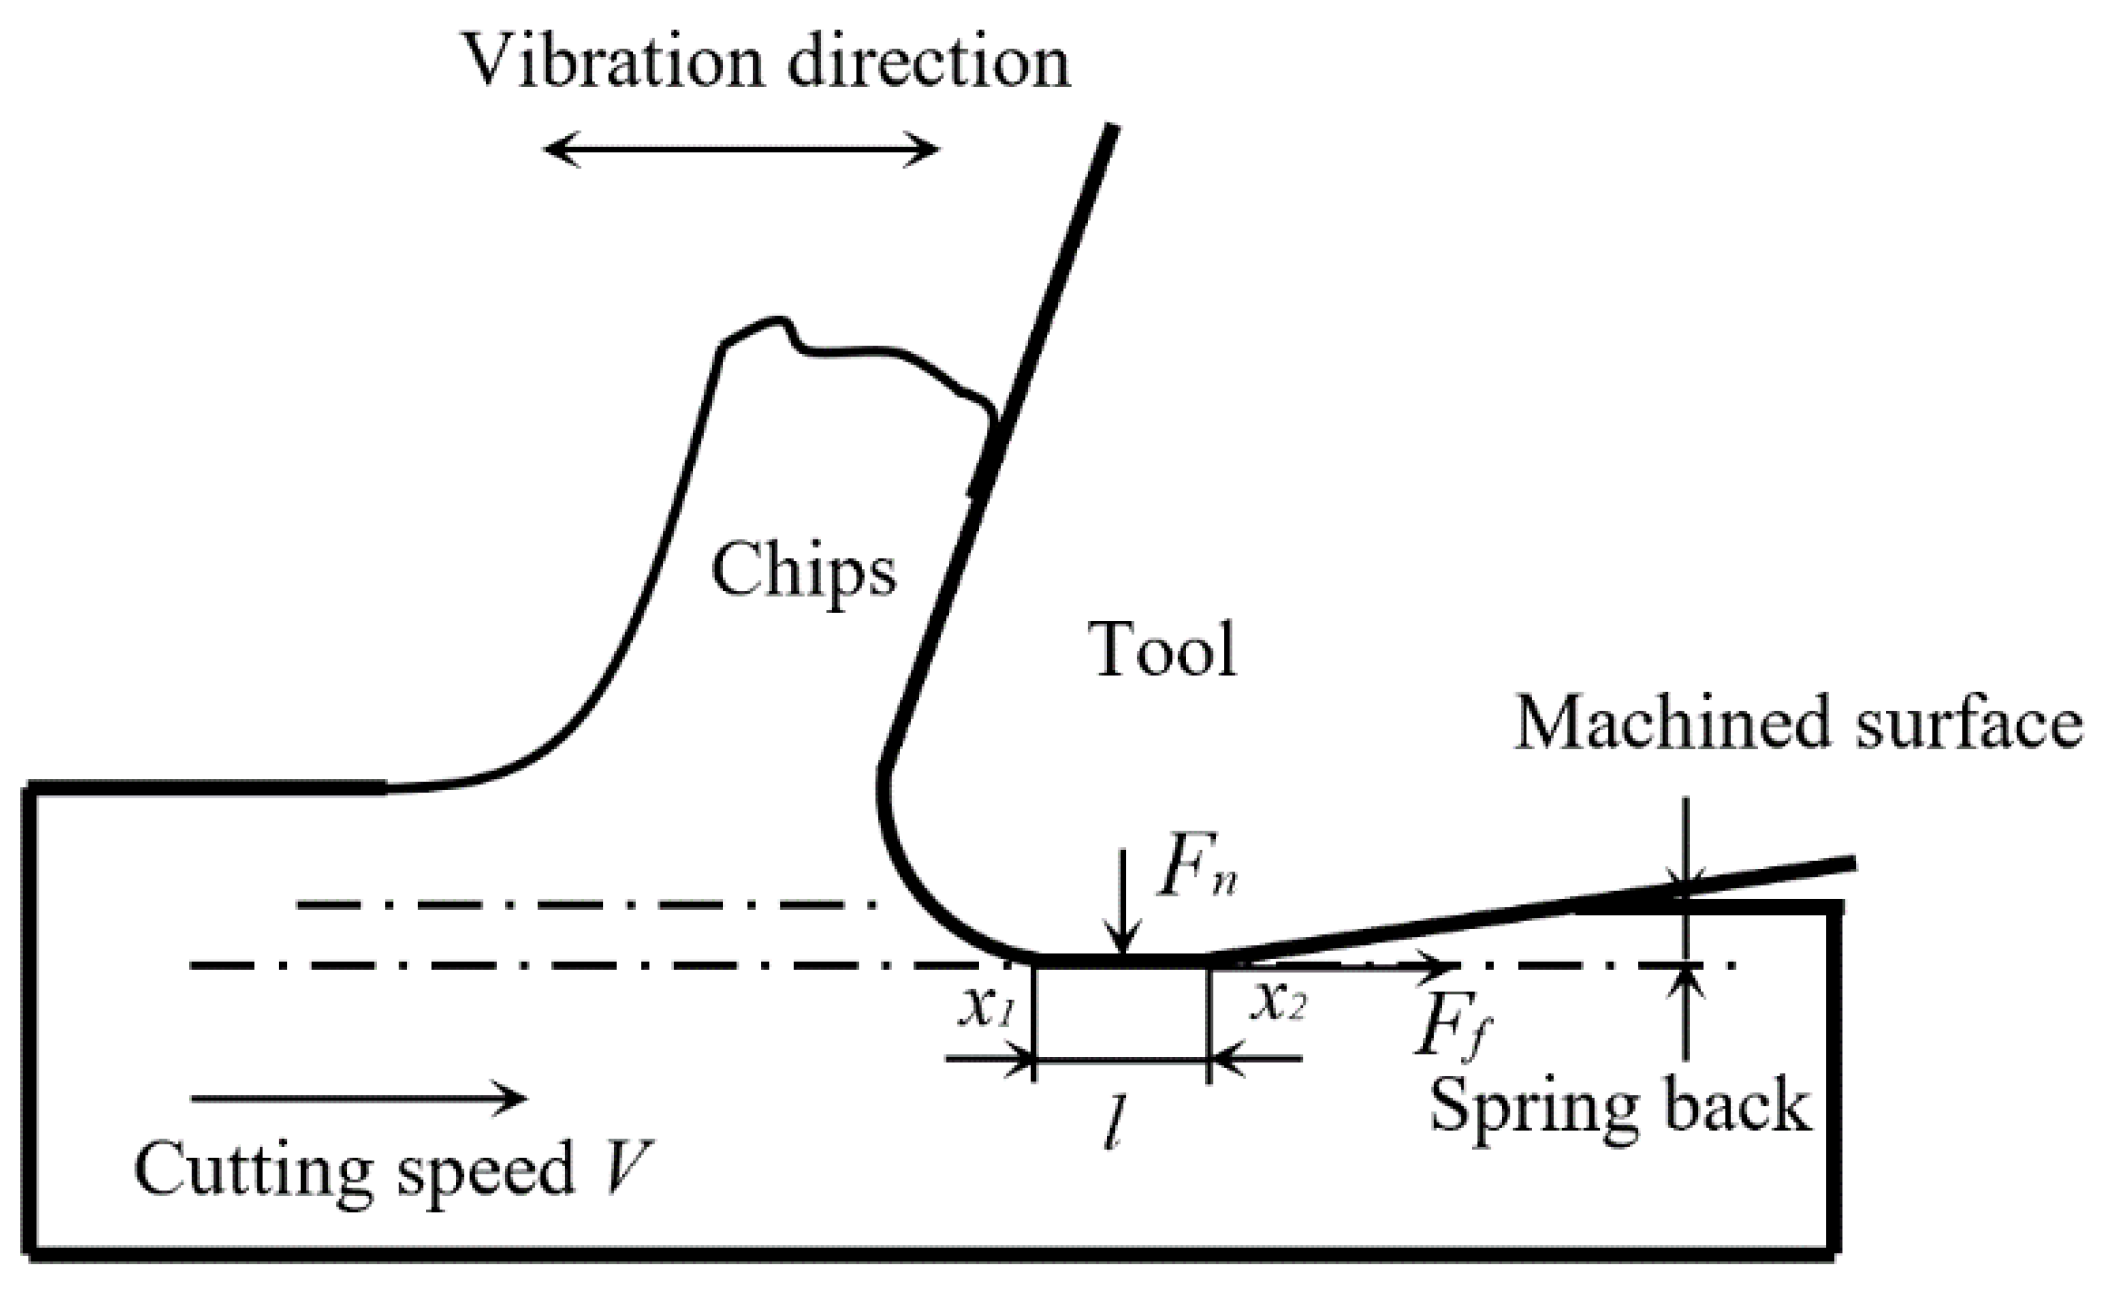 micromate allowable vibrations from structure